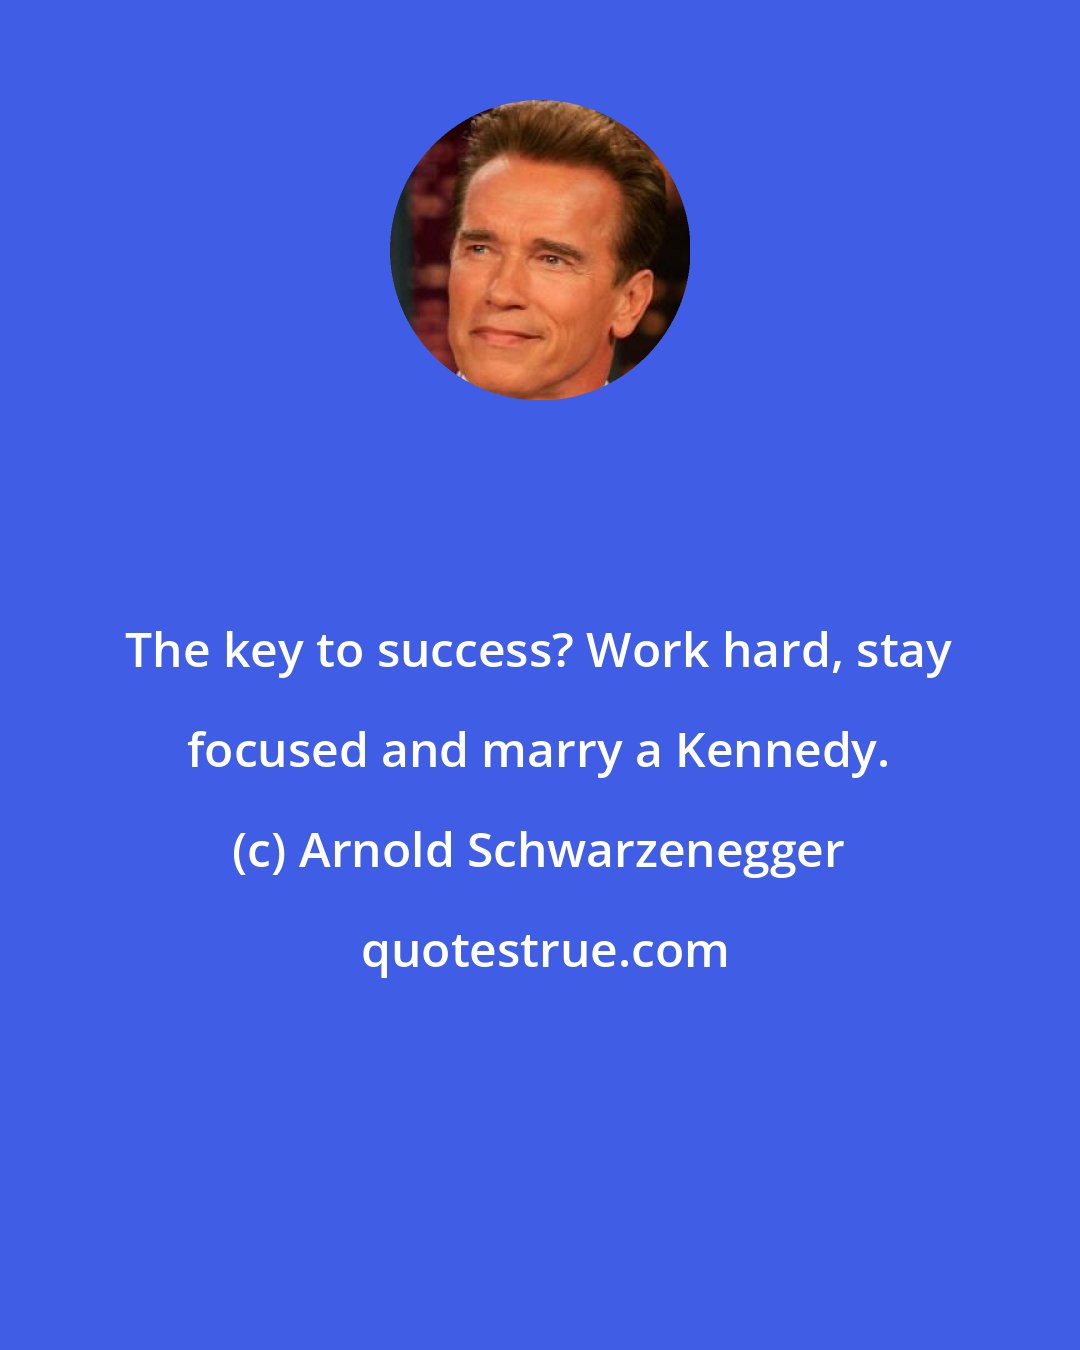 Arnold Schwarzenegger: The key to success? Work hard, stay focused and marry a Kennedy.